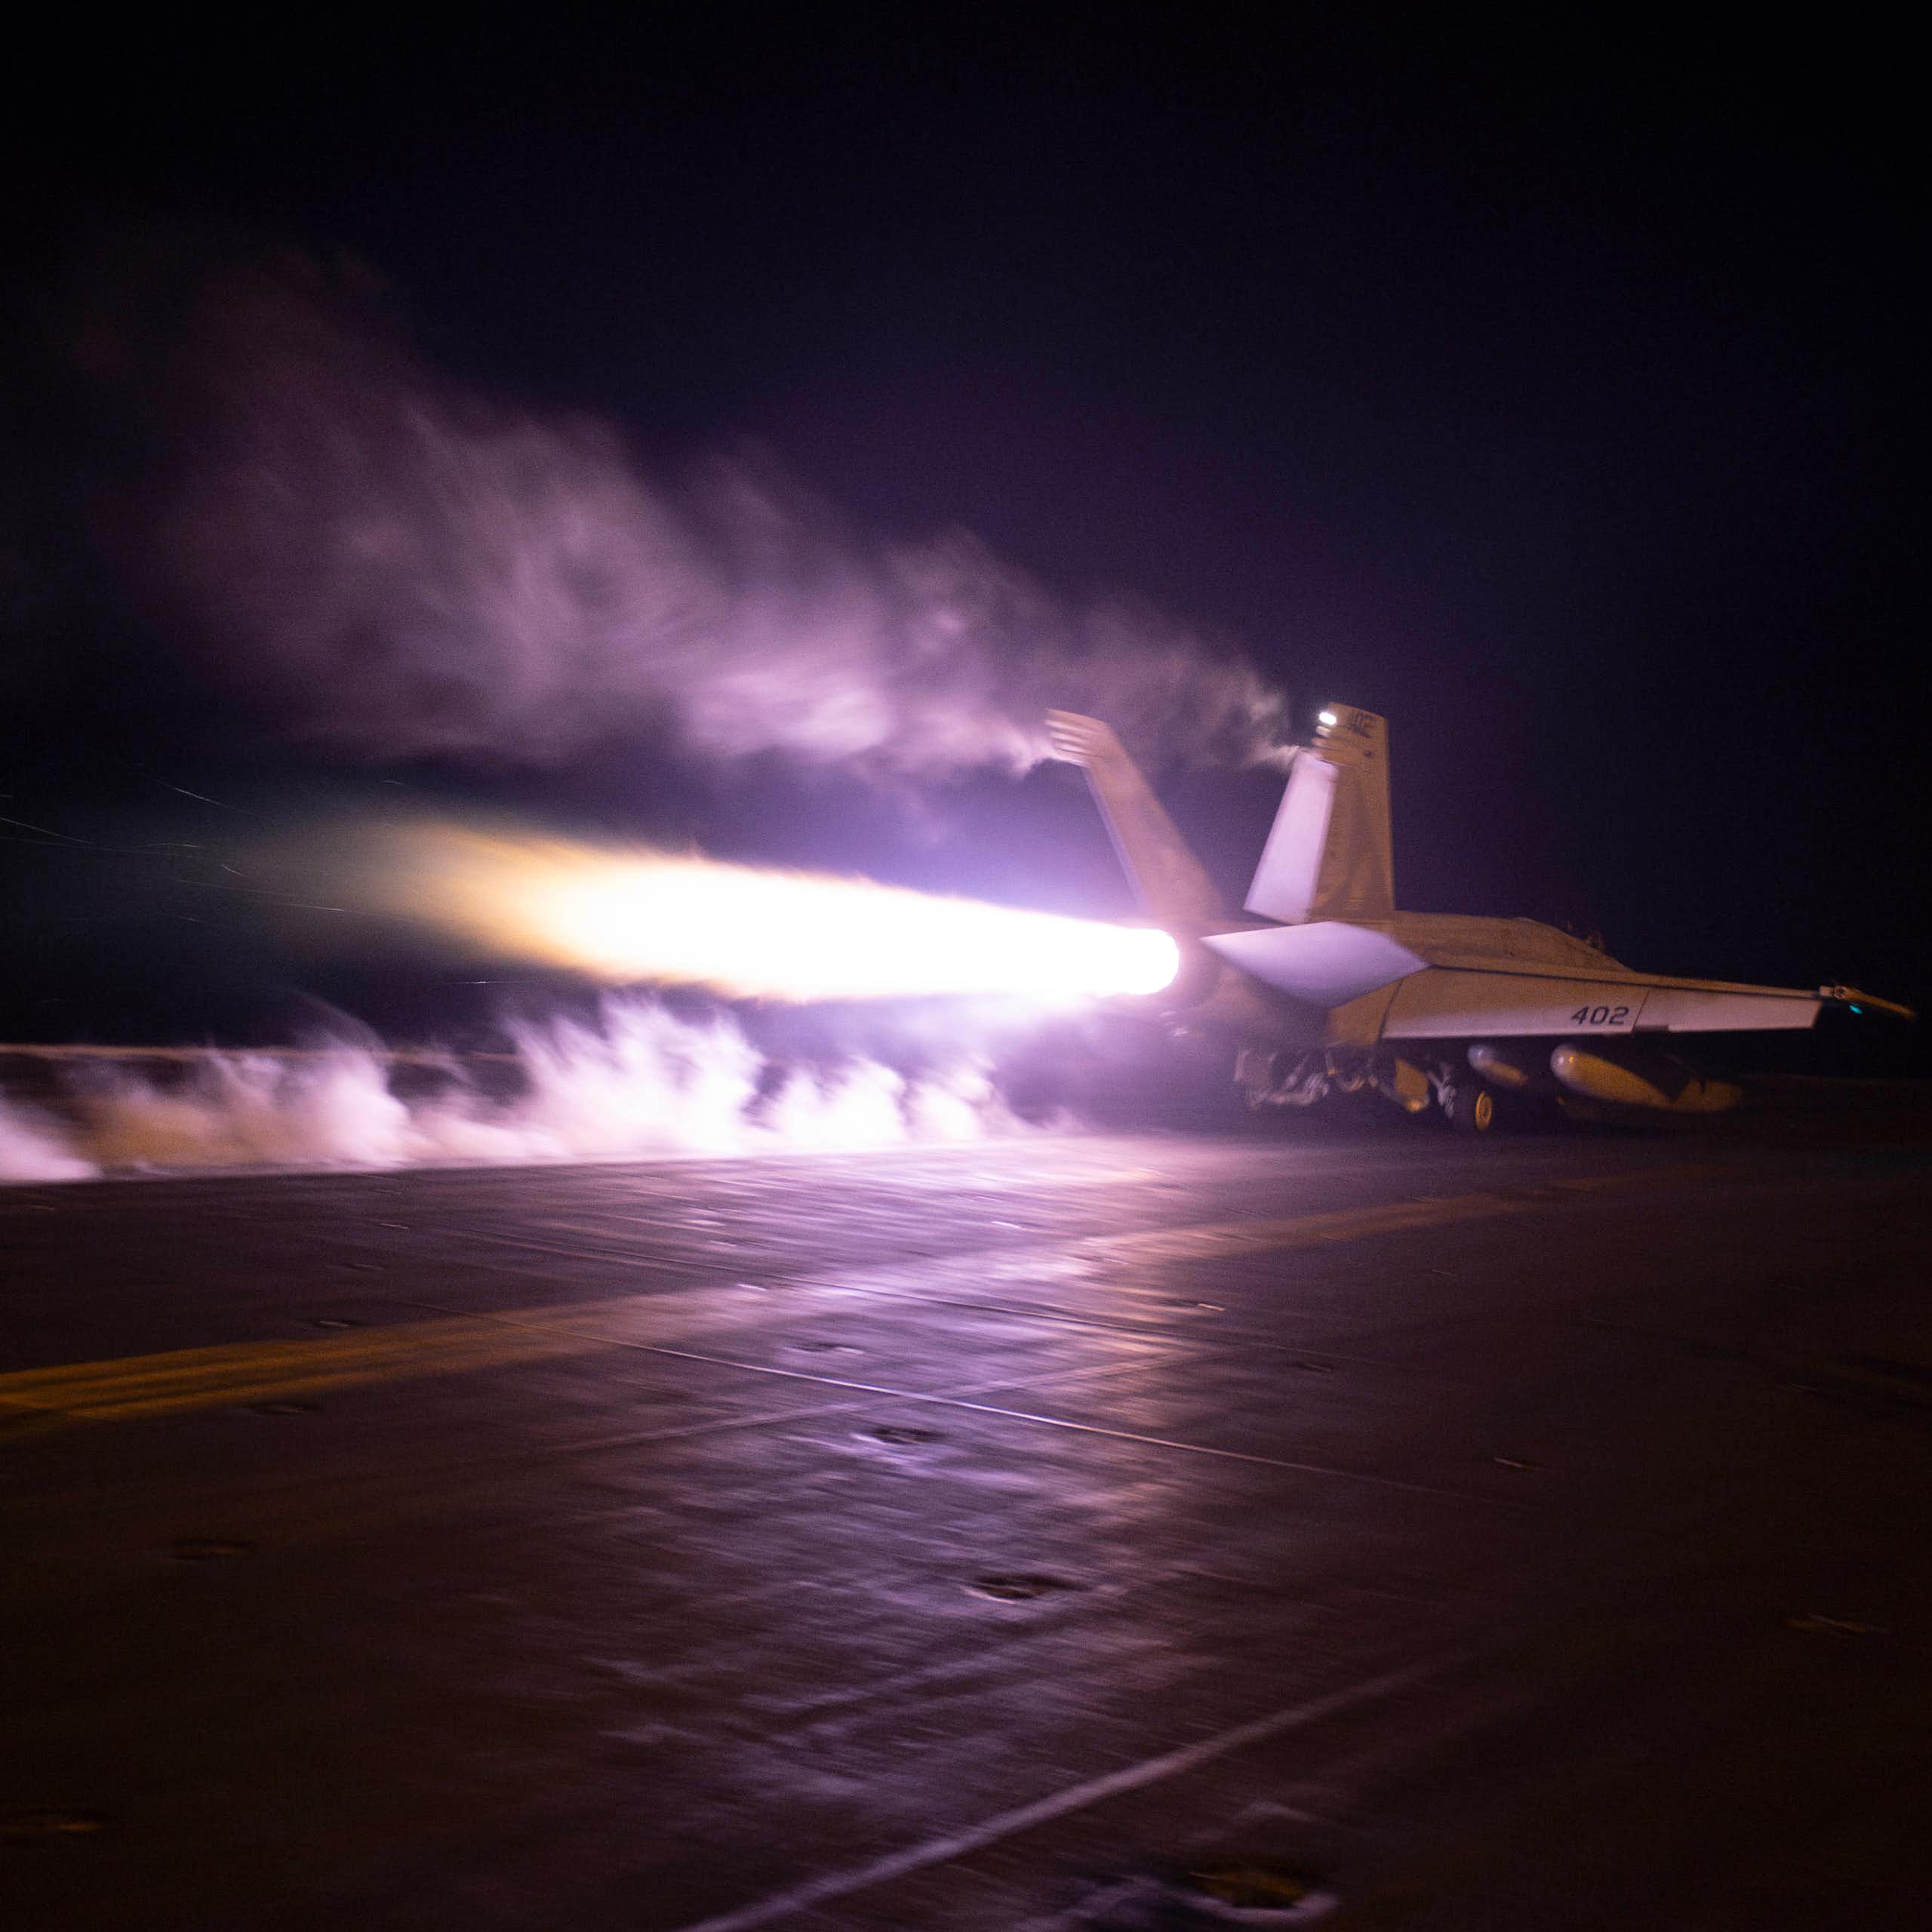 An aircraft carrier with a plume of flame jutting from its rear.